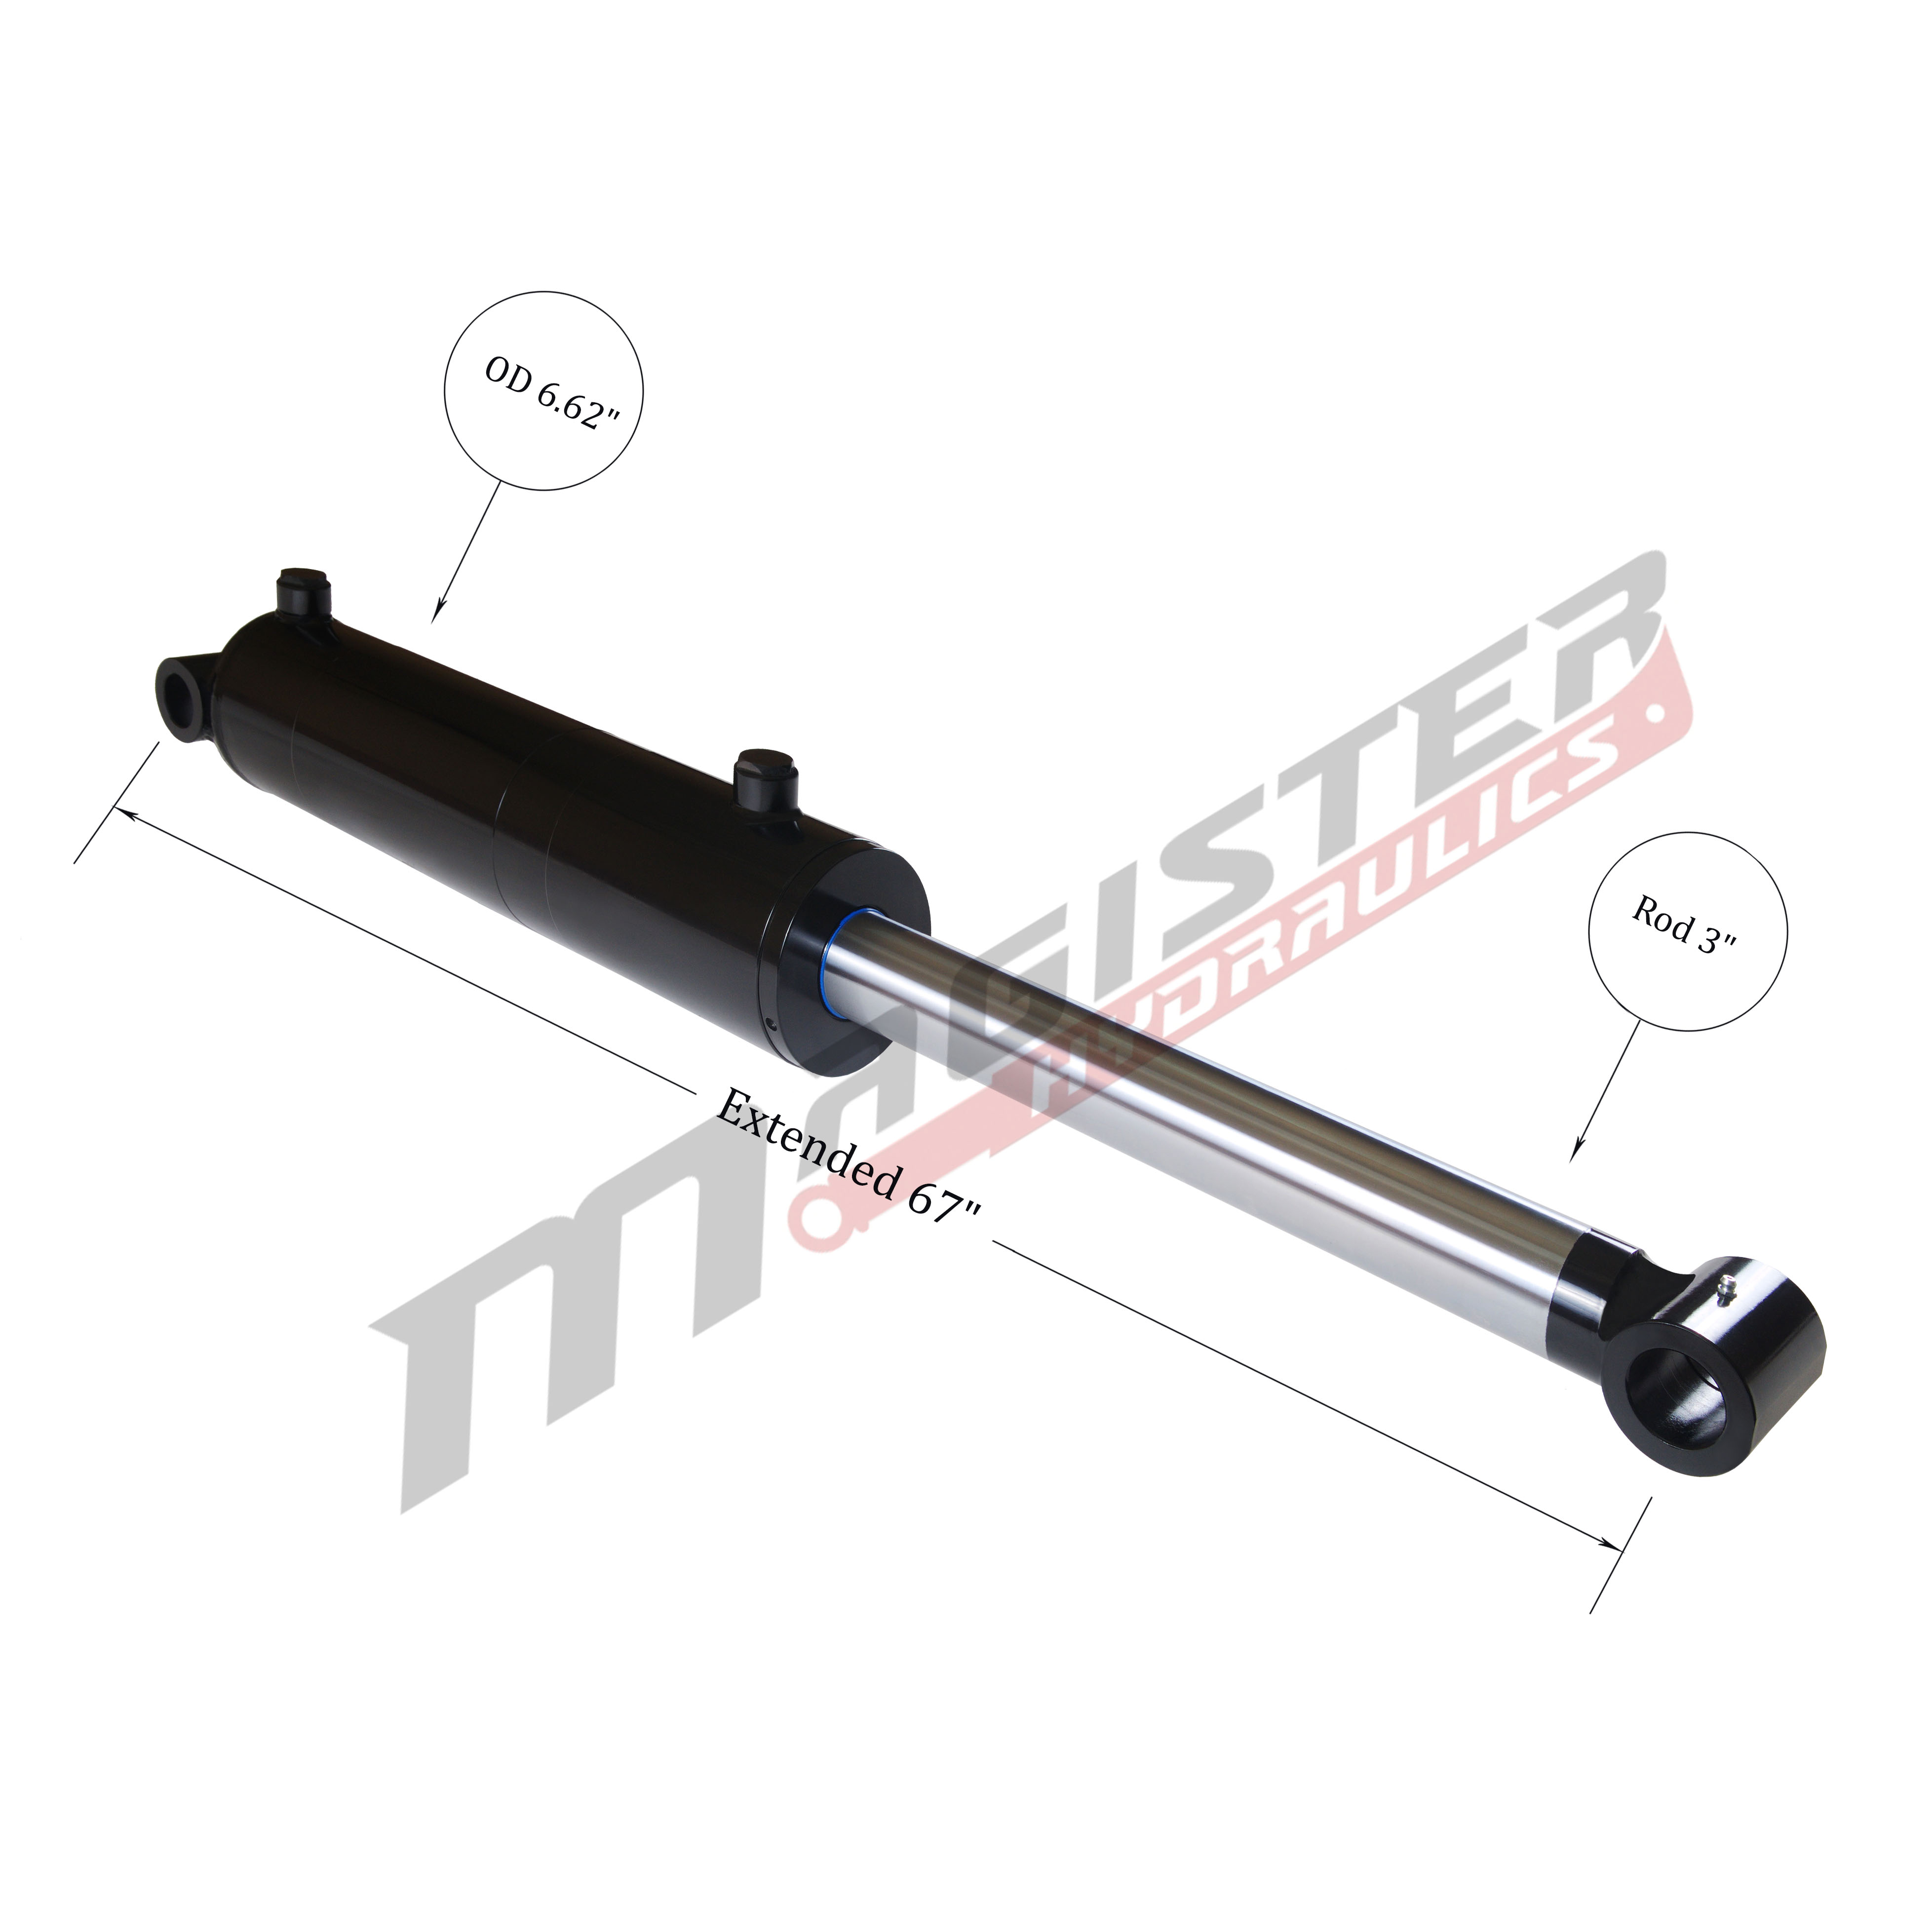 6 bore x 28 stroke hydraulic cylinder, welded cross tube double acting cylinder | Magister Hydraulics